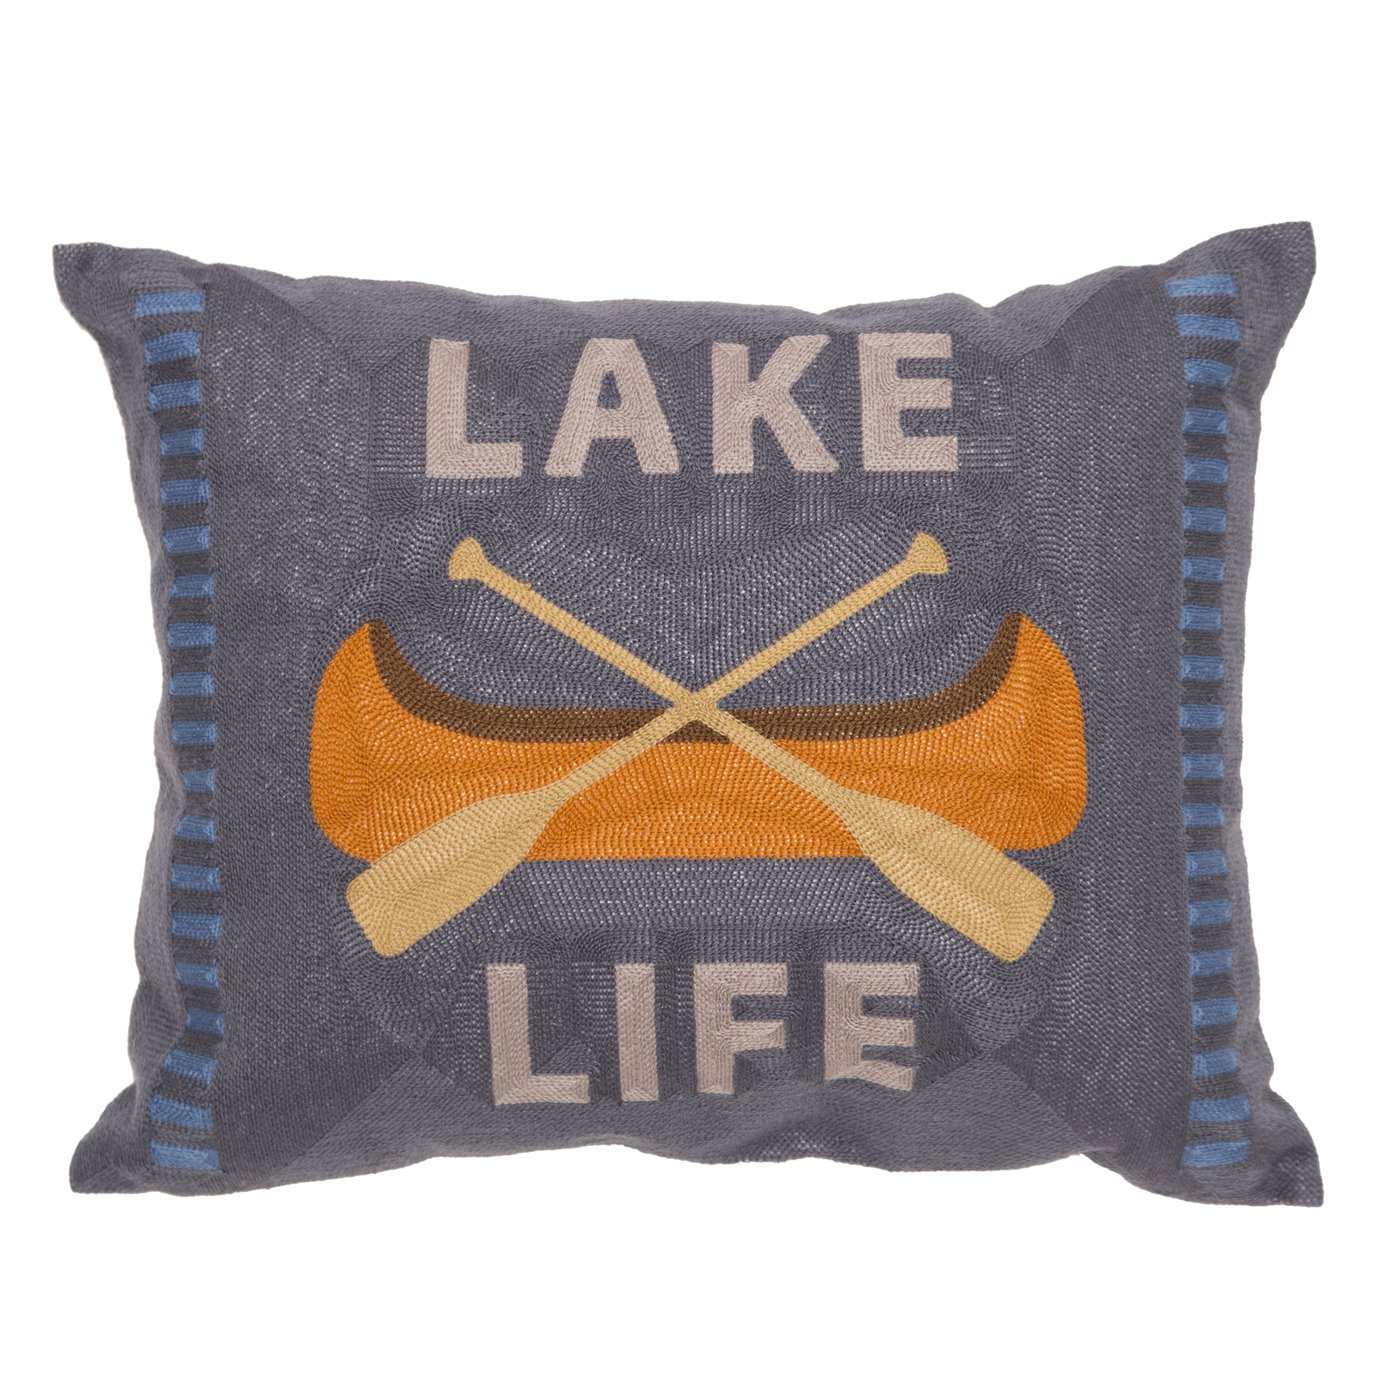 Carstens Lake Life Rustic Cabin Chain Stitch Throw Pillow 18" x 18"